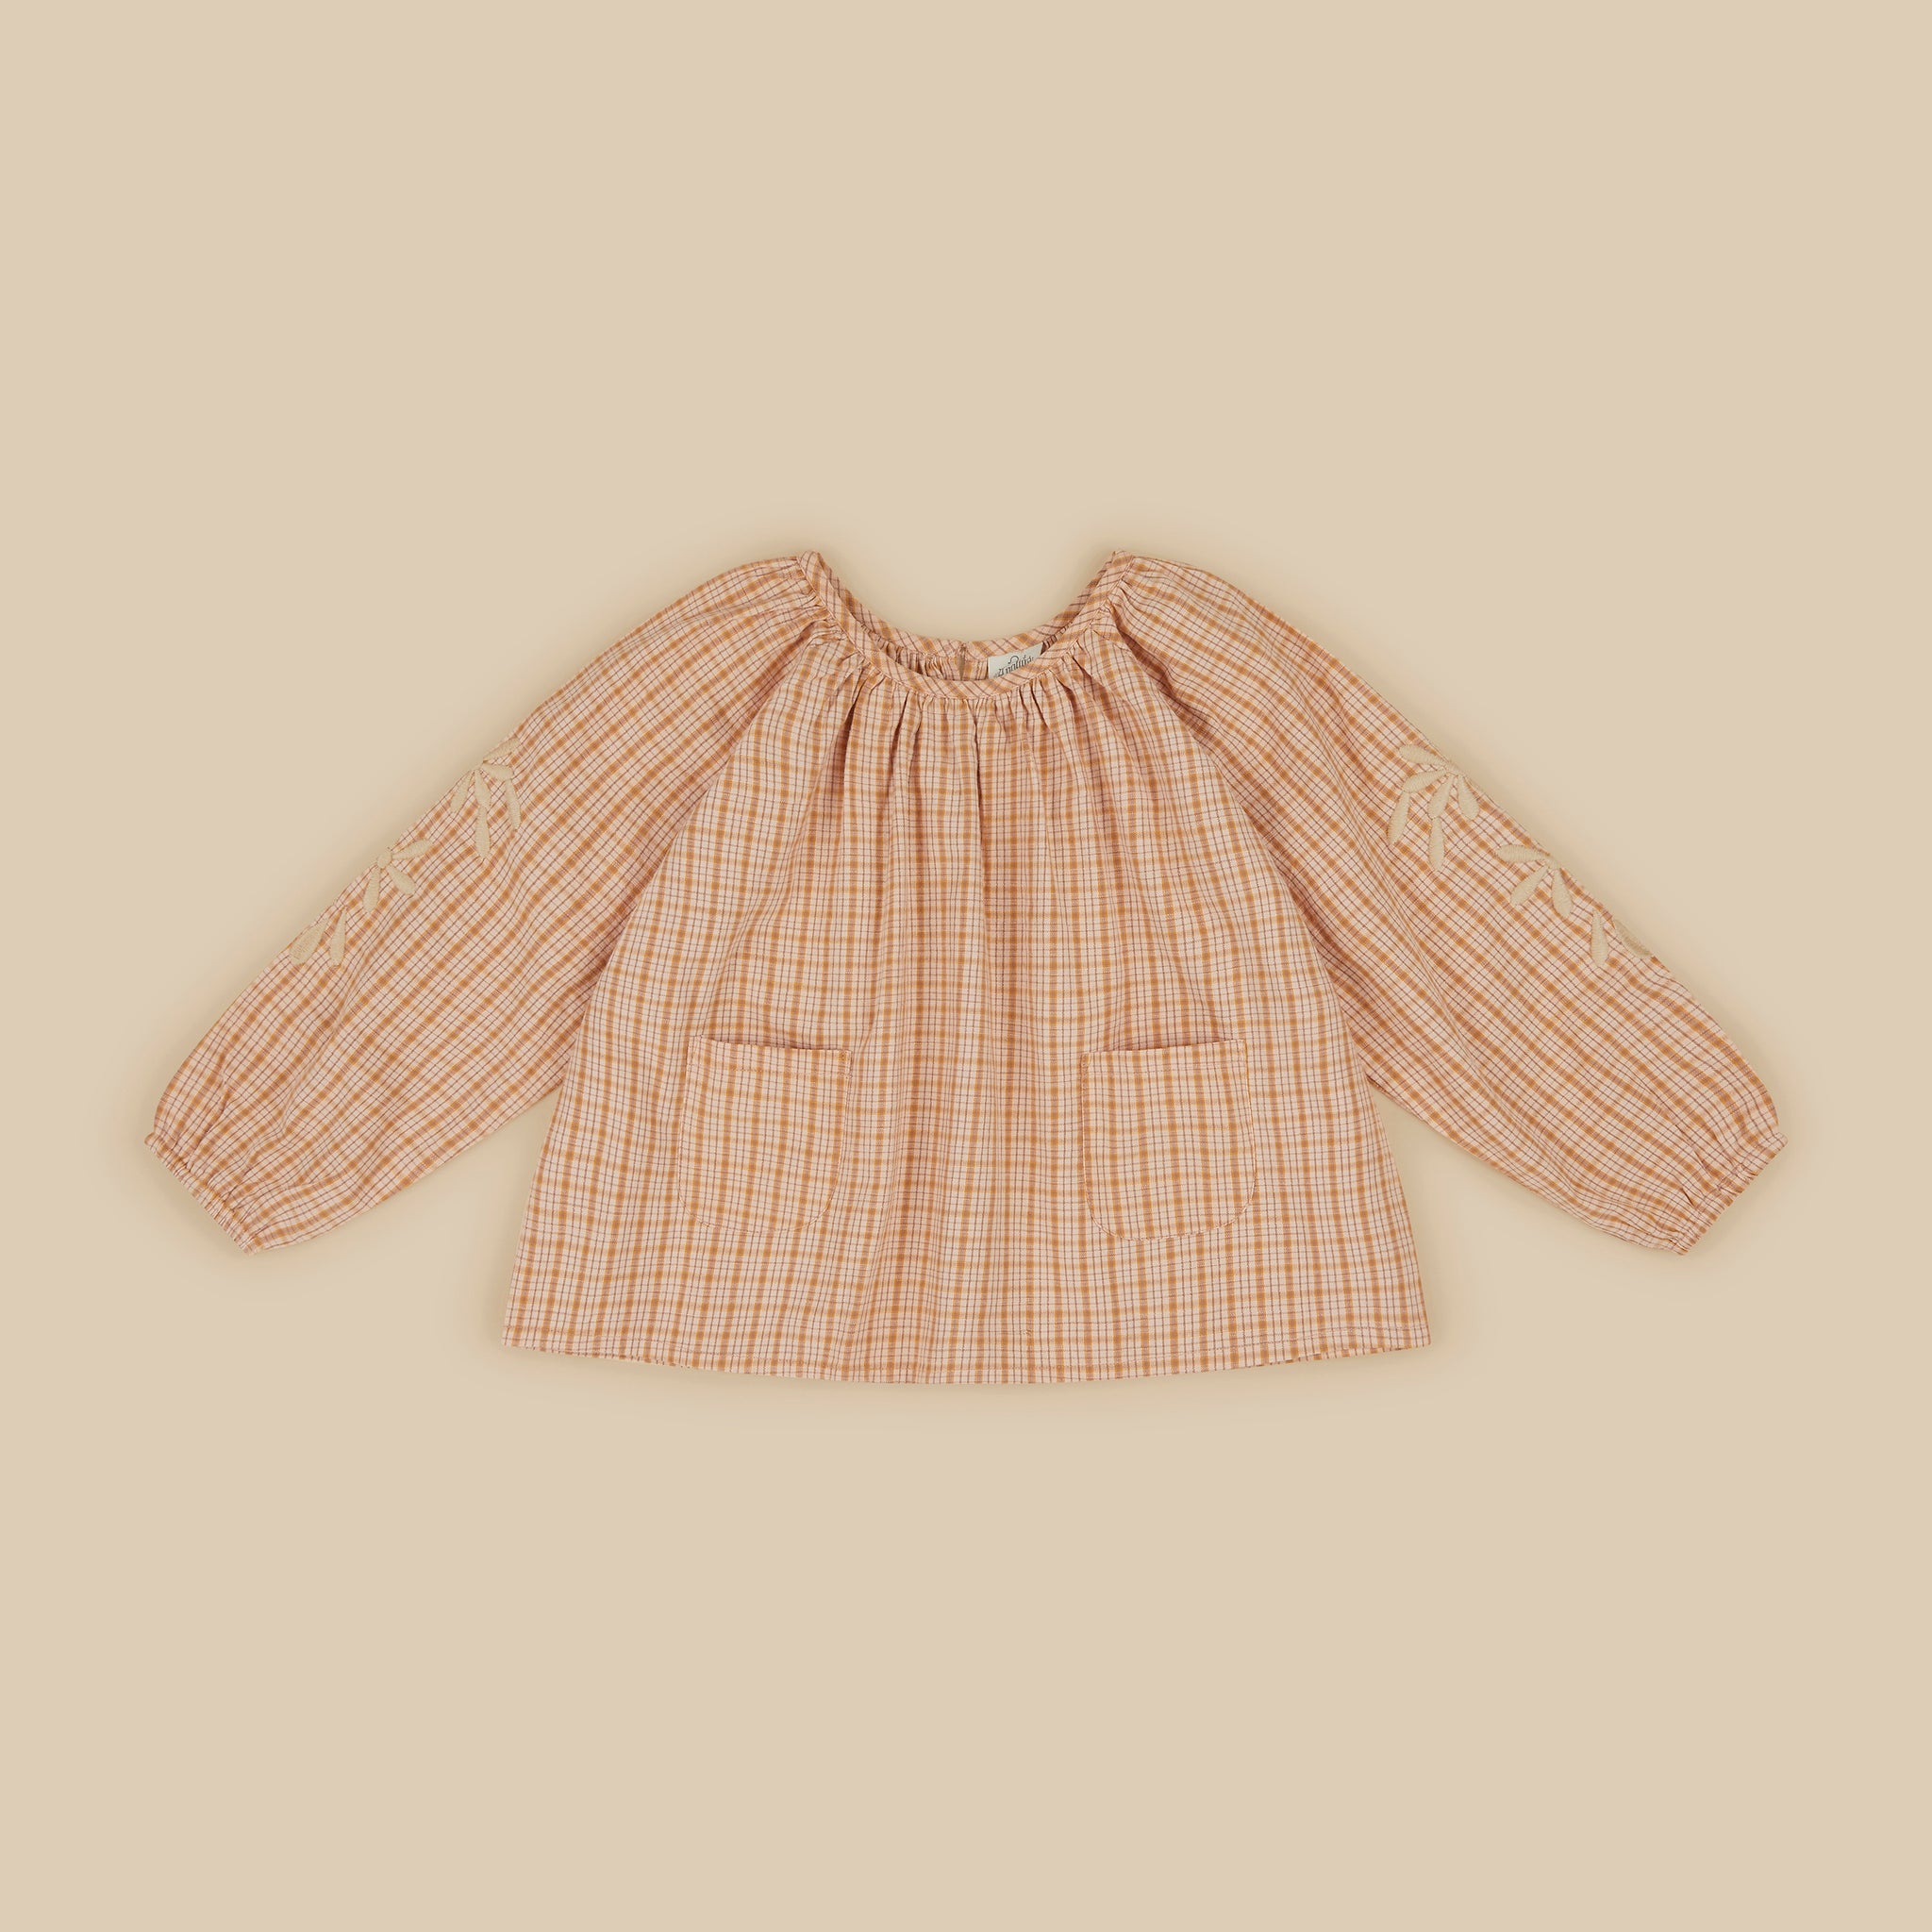 'Jeanne' Top - Forester Check Ribbon